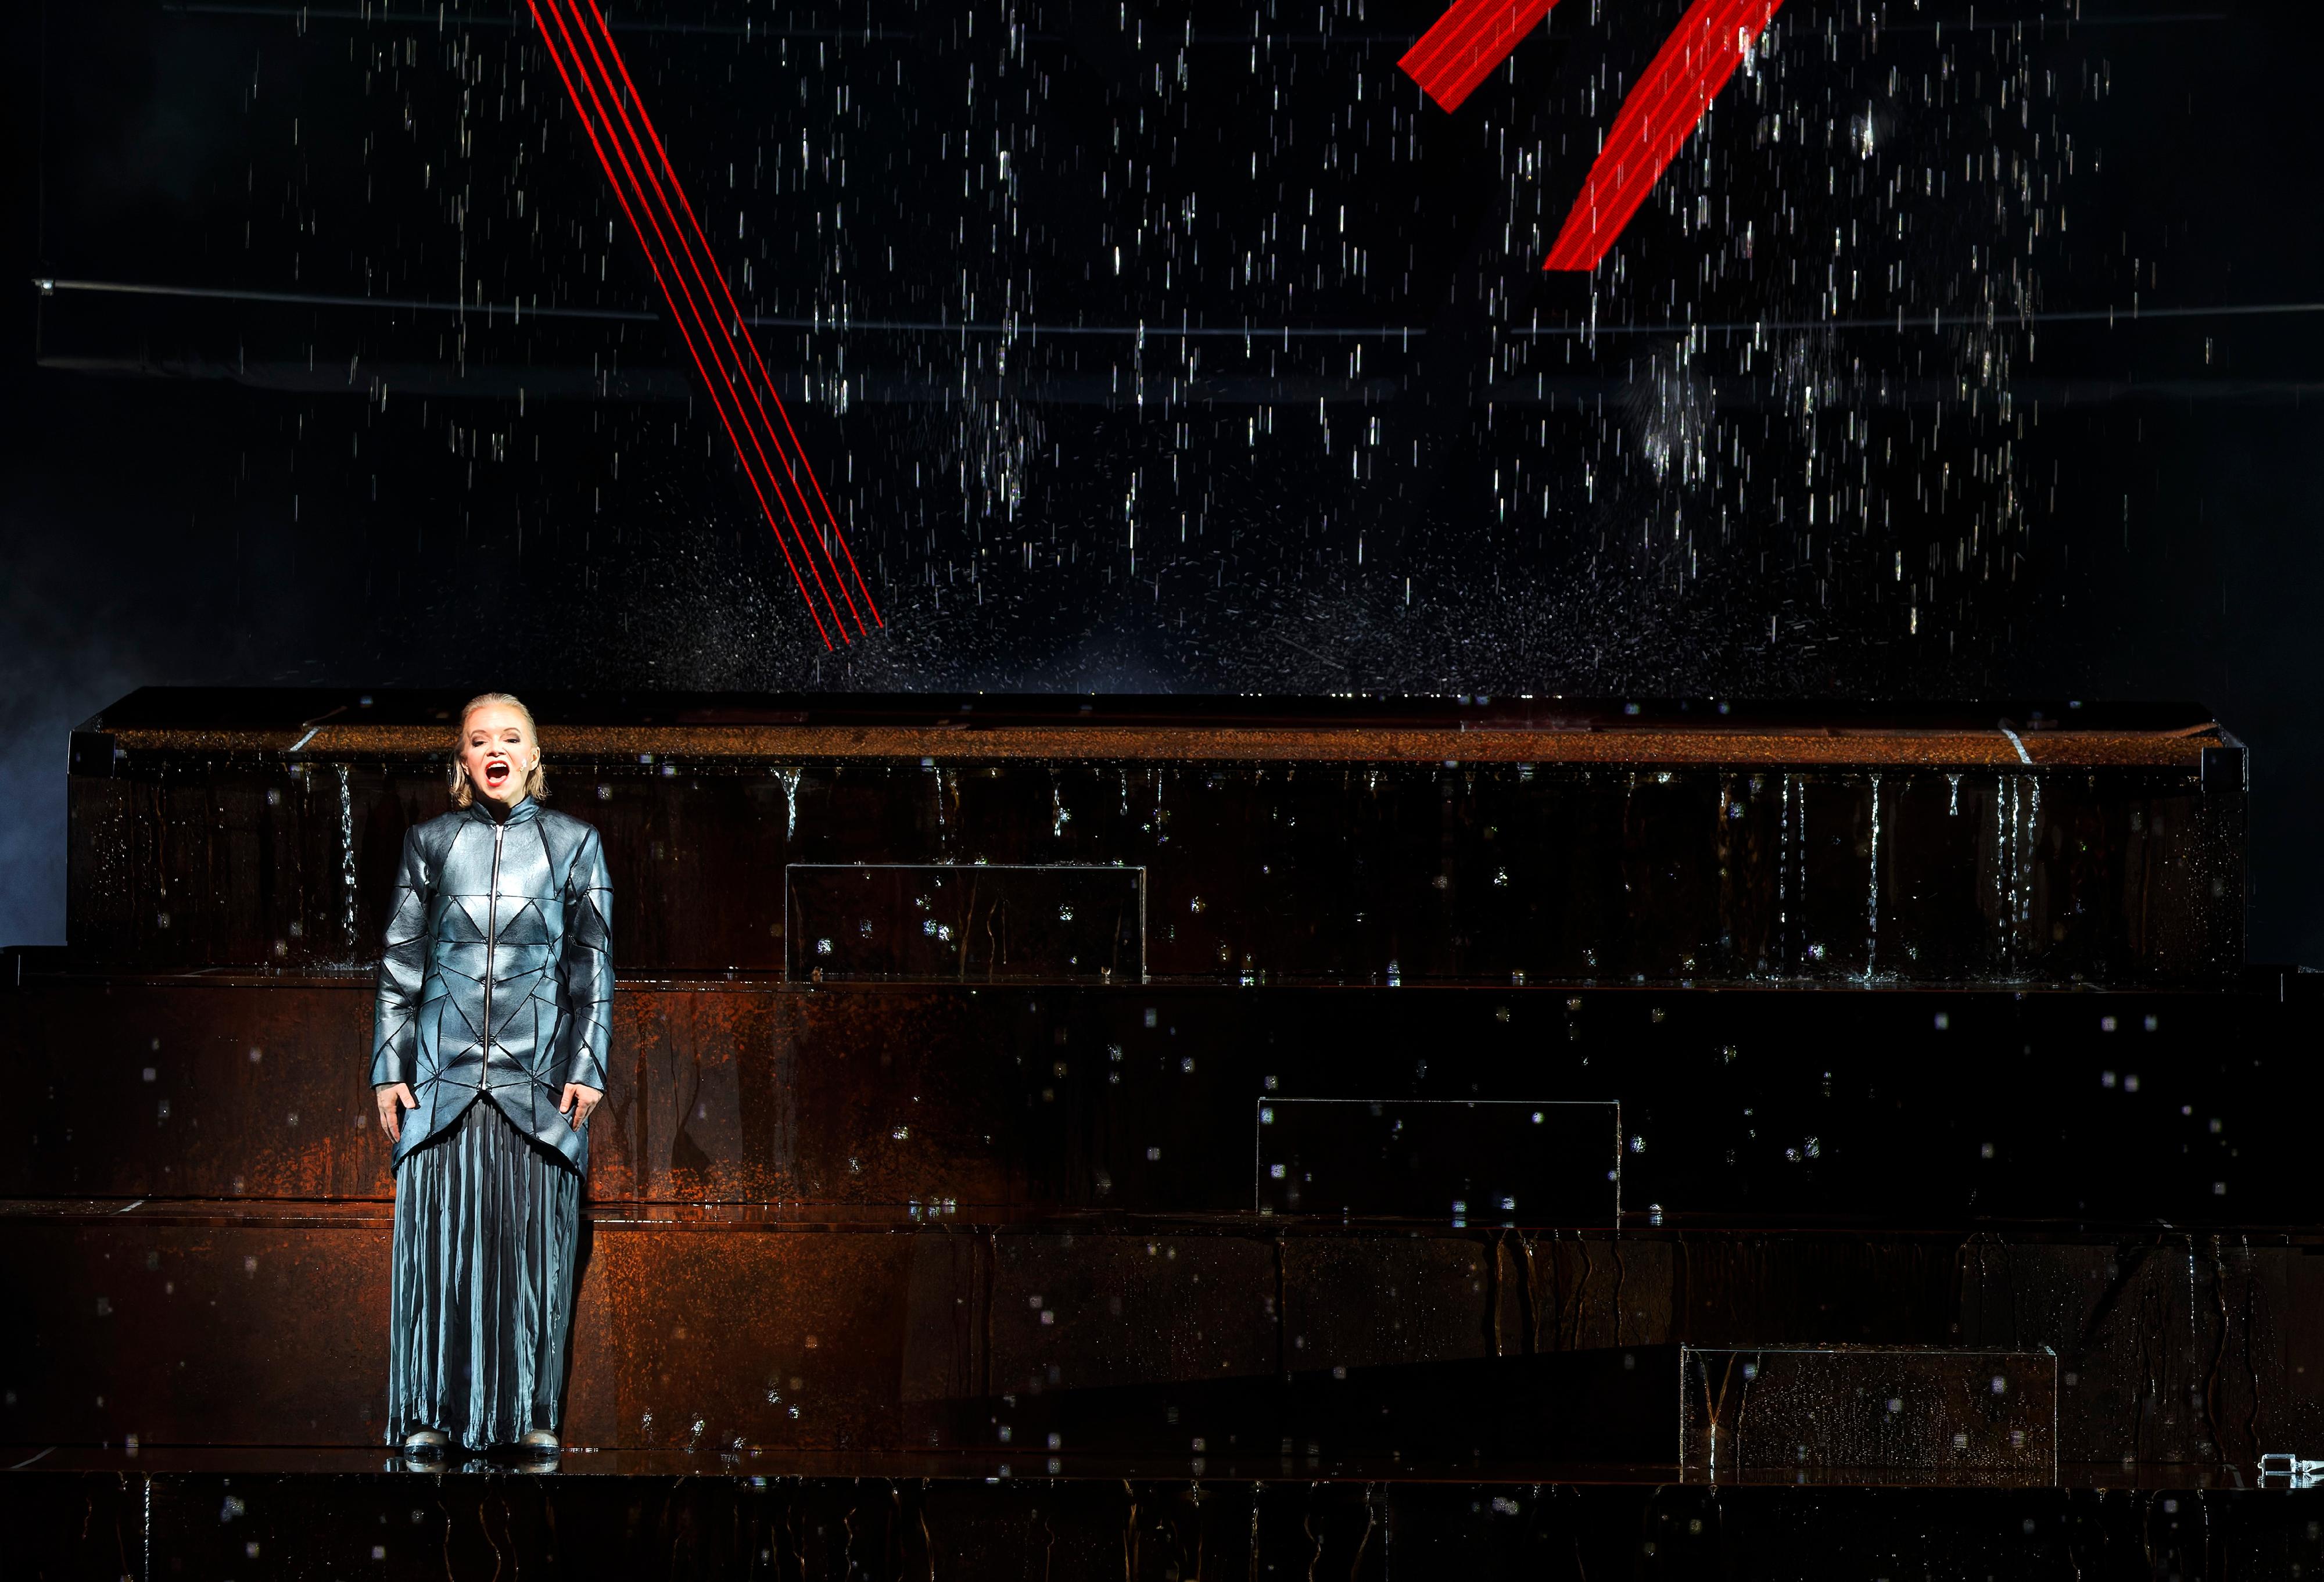 The artificial intelligence (AI) opera "chasing waterfalls", one of the programmes of the New Vision Arts Festival, will be staged on November 5 and 6 at the Kwai Tsing Theatre Auditorium. In the opera, AI learns to simulate pixels and the singing voice, even challenging real-life opera singers. (Photo: Manfred Vogel)